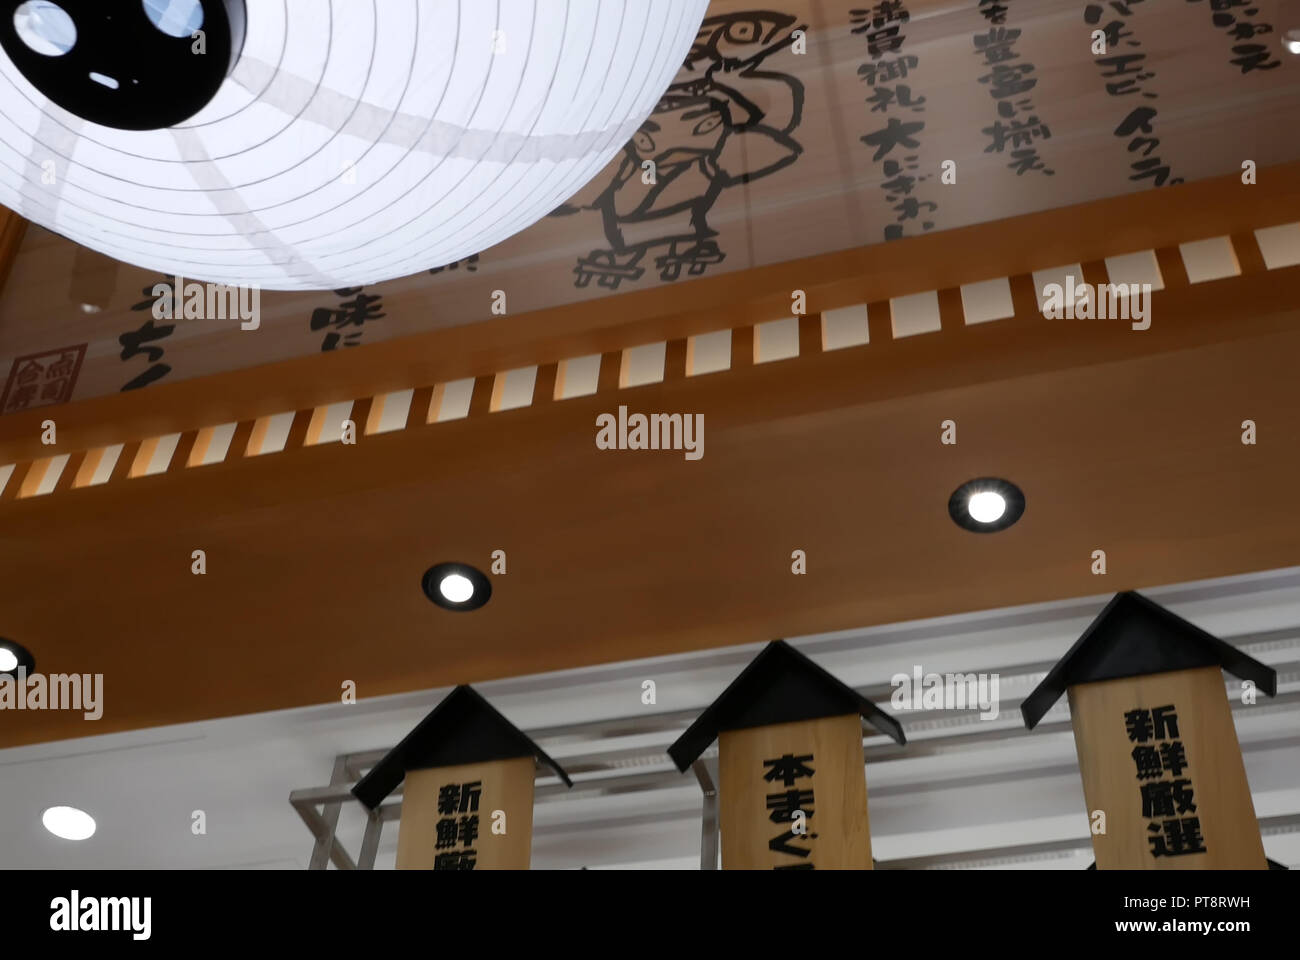 Taipei, Taiwan - August 25, 2018 : Motion of decoration ball paper lantern hanging on roof inside a Japanese restaurant in Taiwan Stock Photo